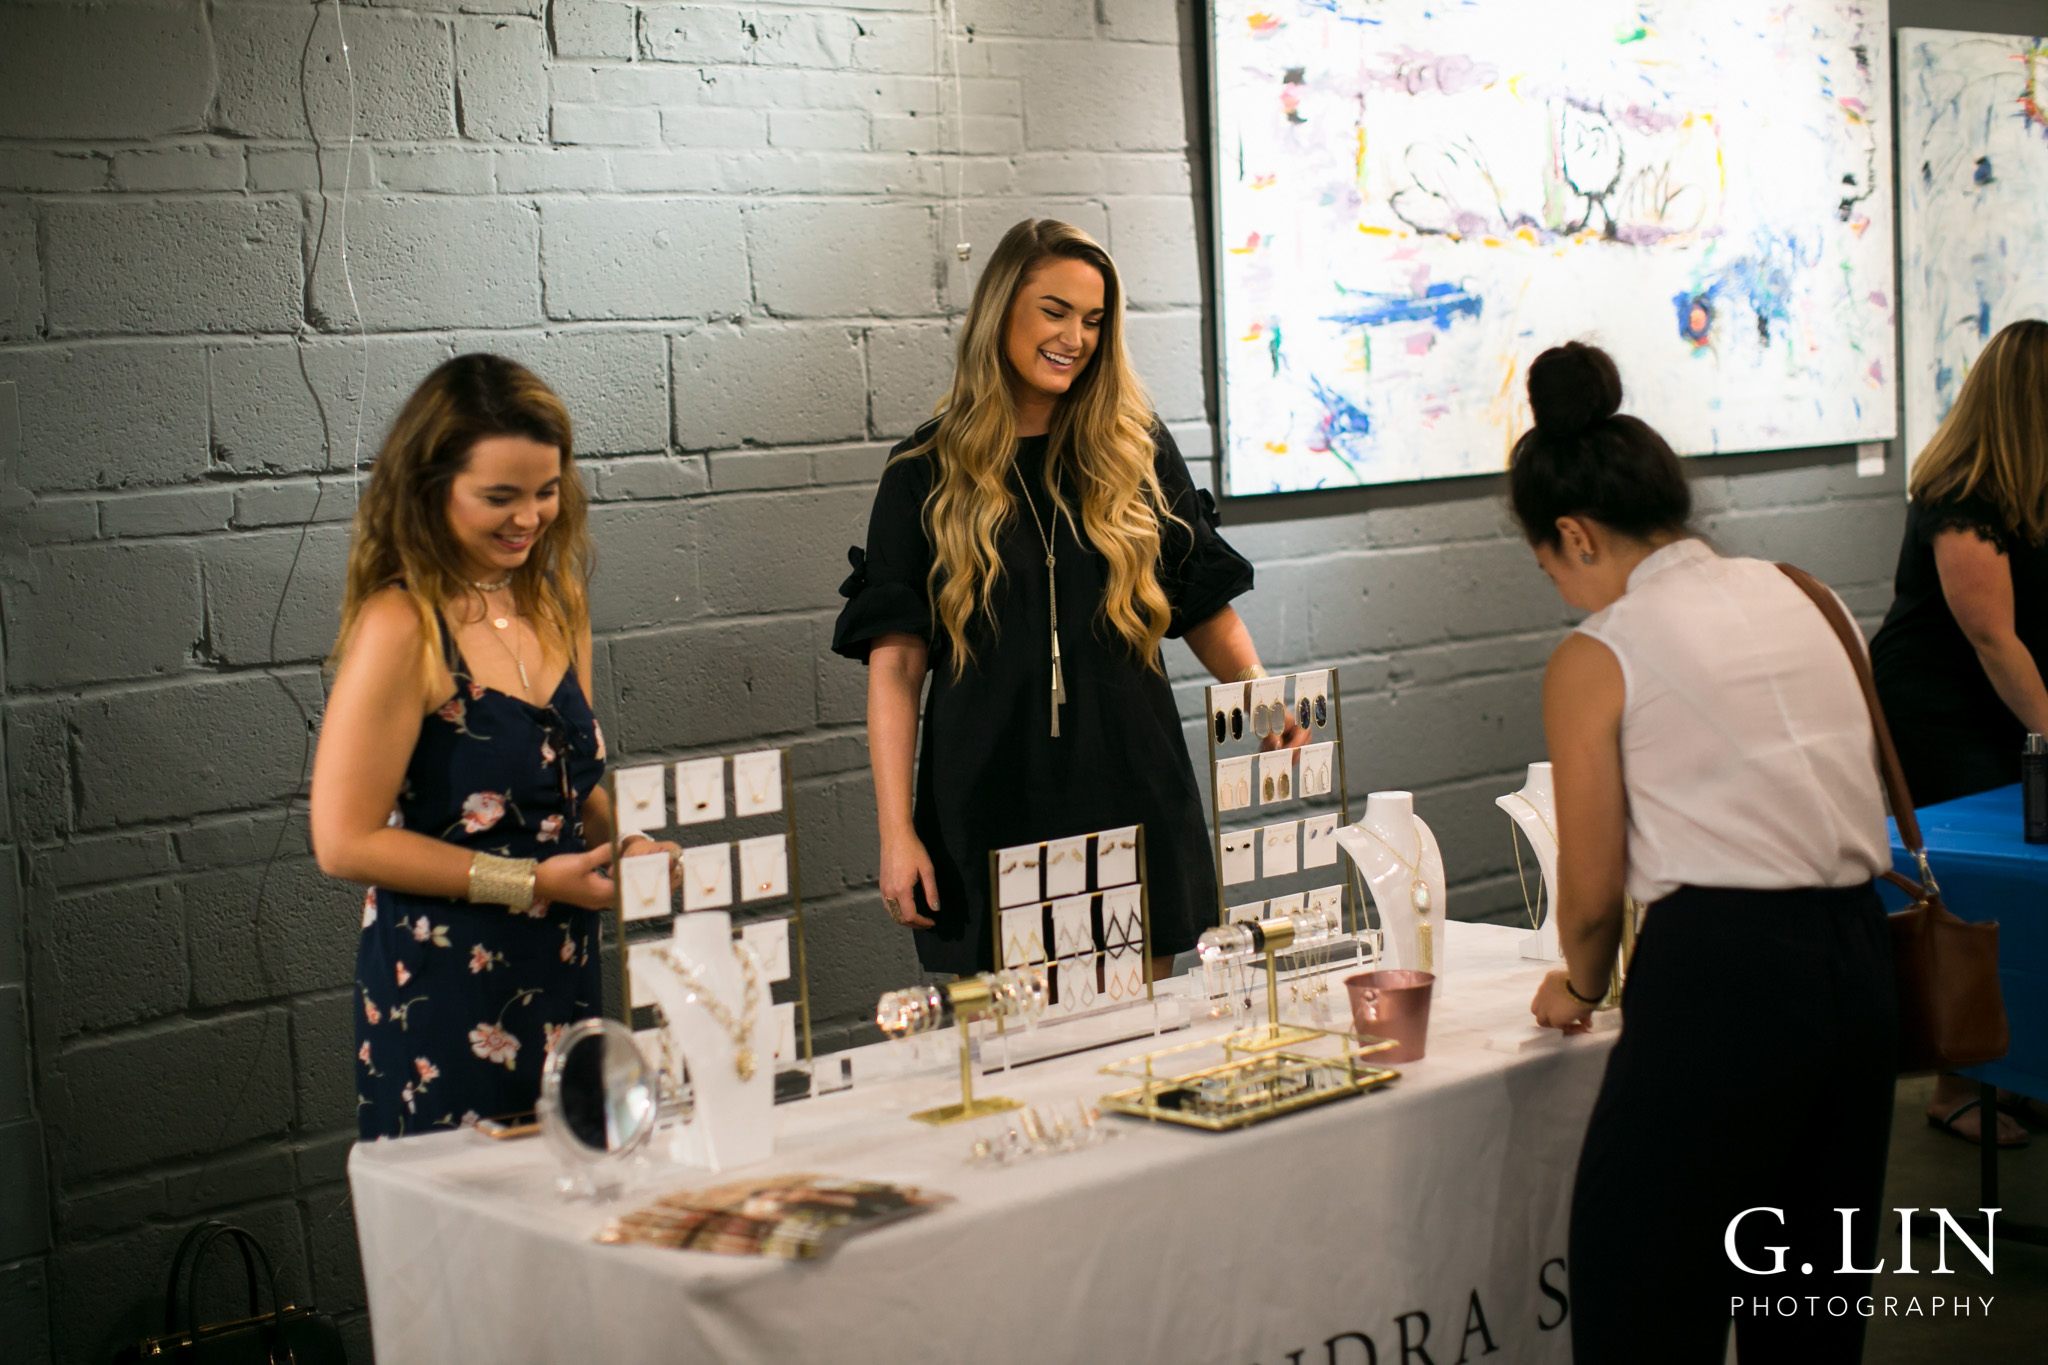 Raleigh Event Photographer | G. Lin Photography | Vendors from Kendra Scott chatting with customers